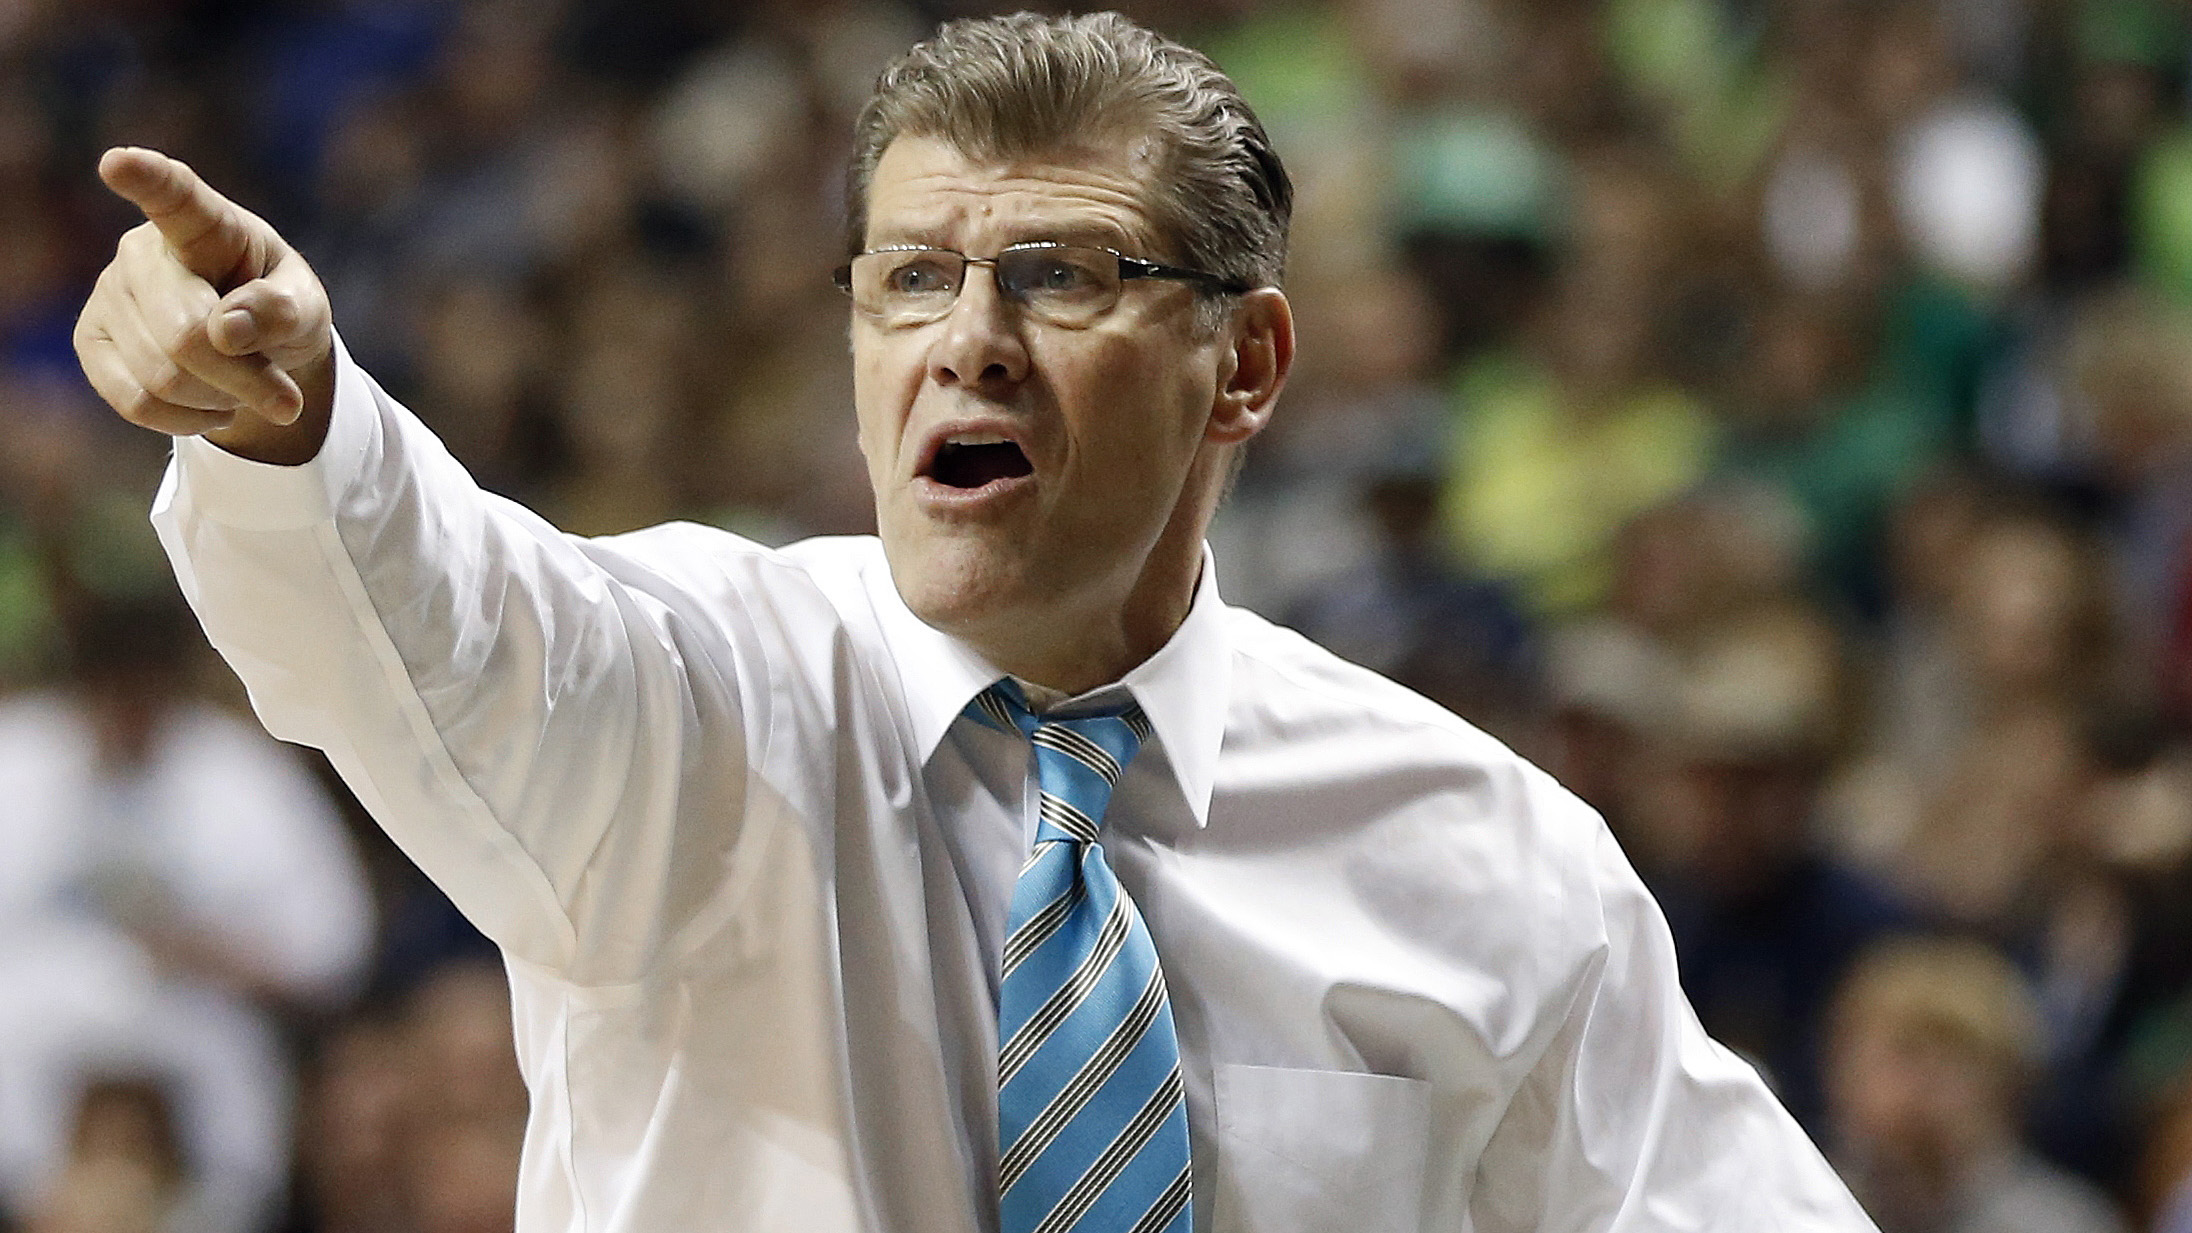 UConn women's basketball coach Geno Auriemma tests positive for COVID-19